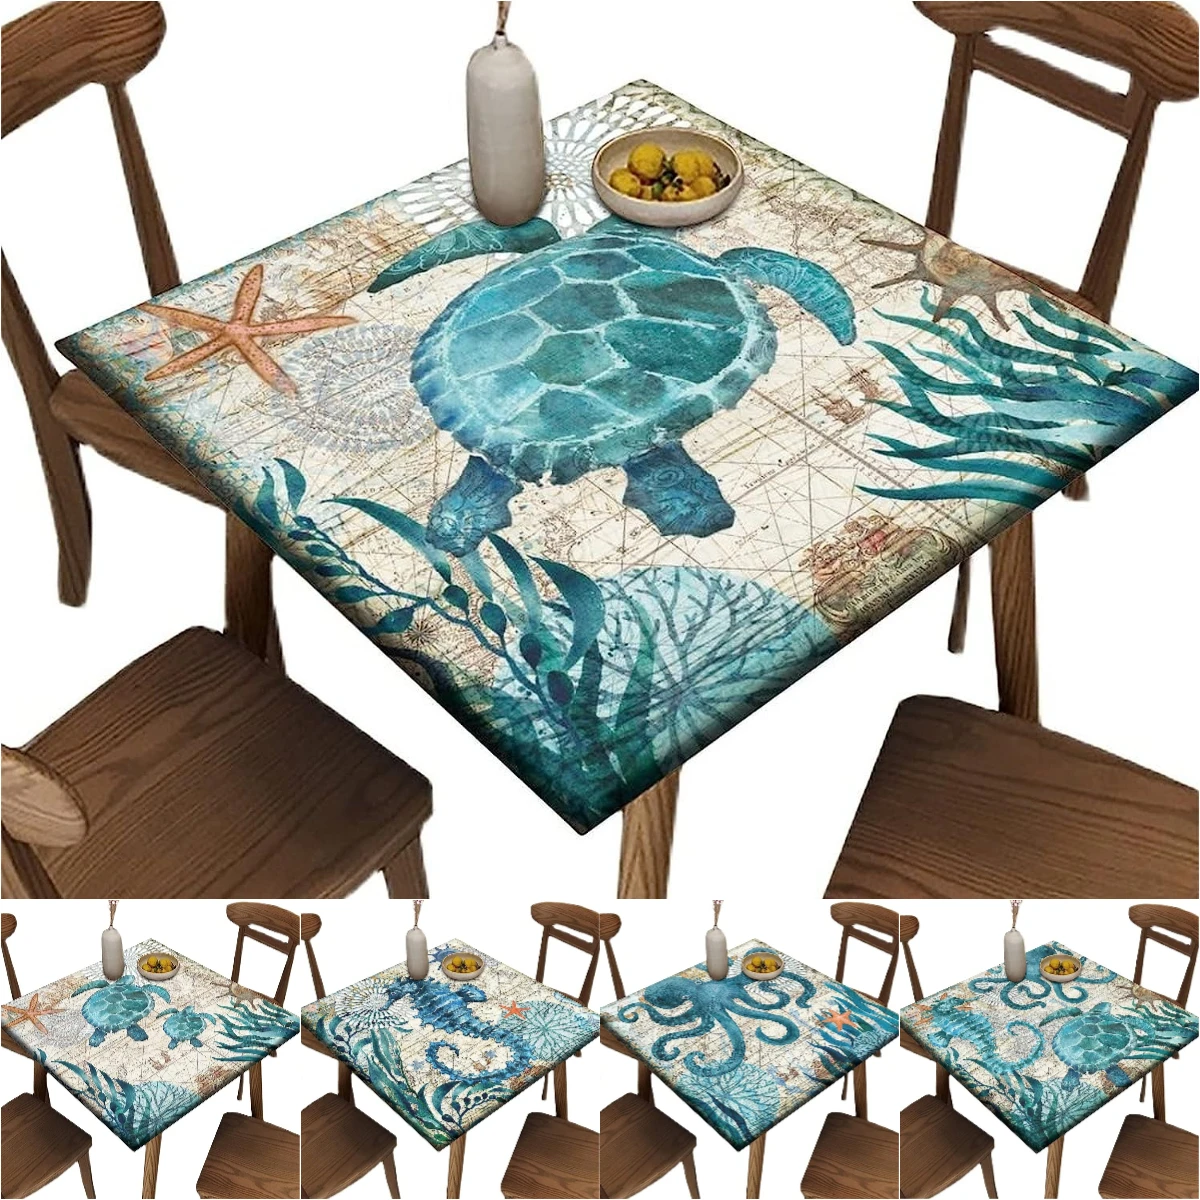 

Ocean Turtle Fitted Square Tablecloth Elastic Edge Table Covers Waterproof Dining Room Tablecloth Decor Party Table Decoration